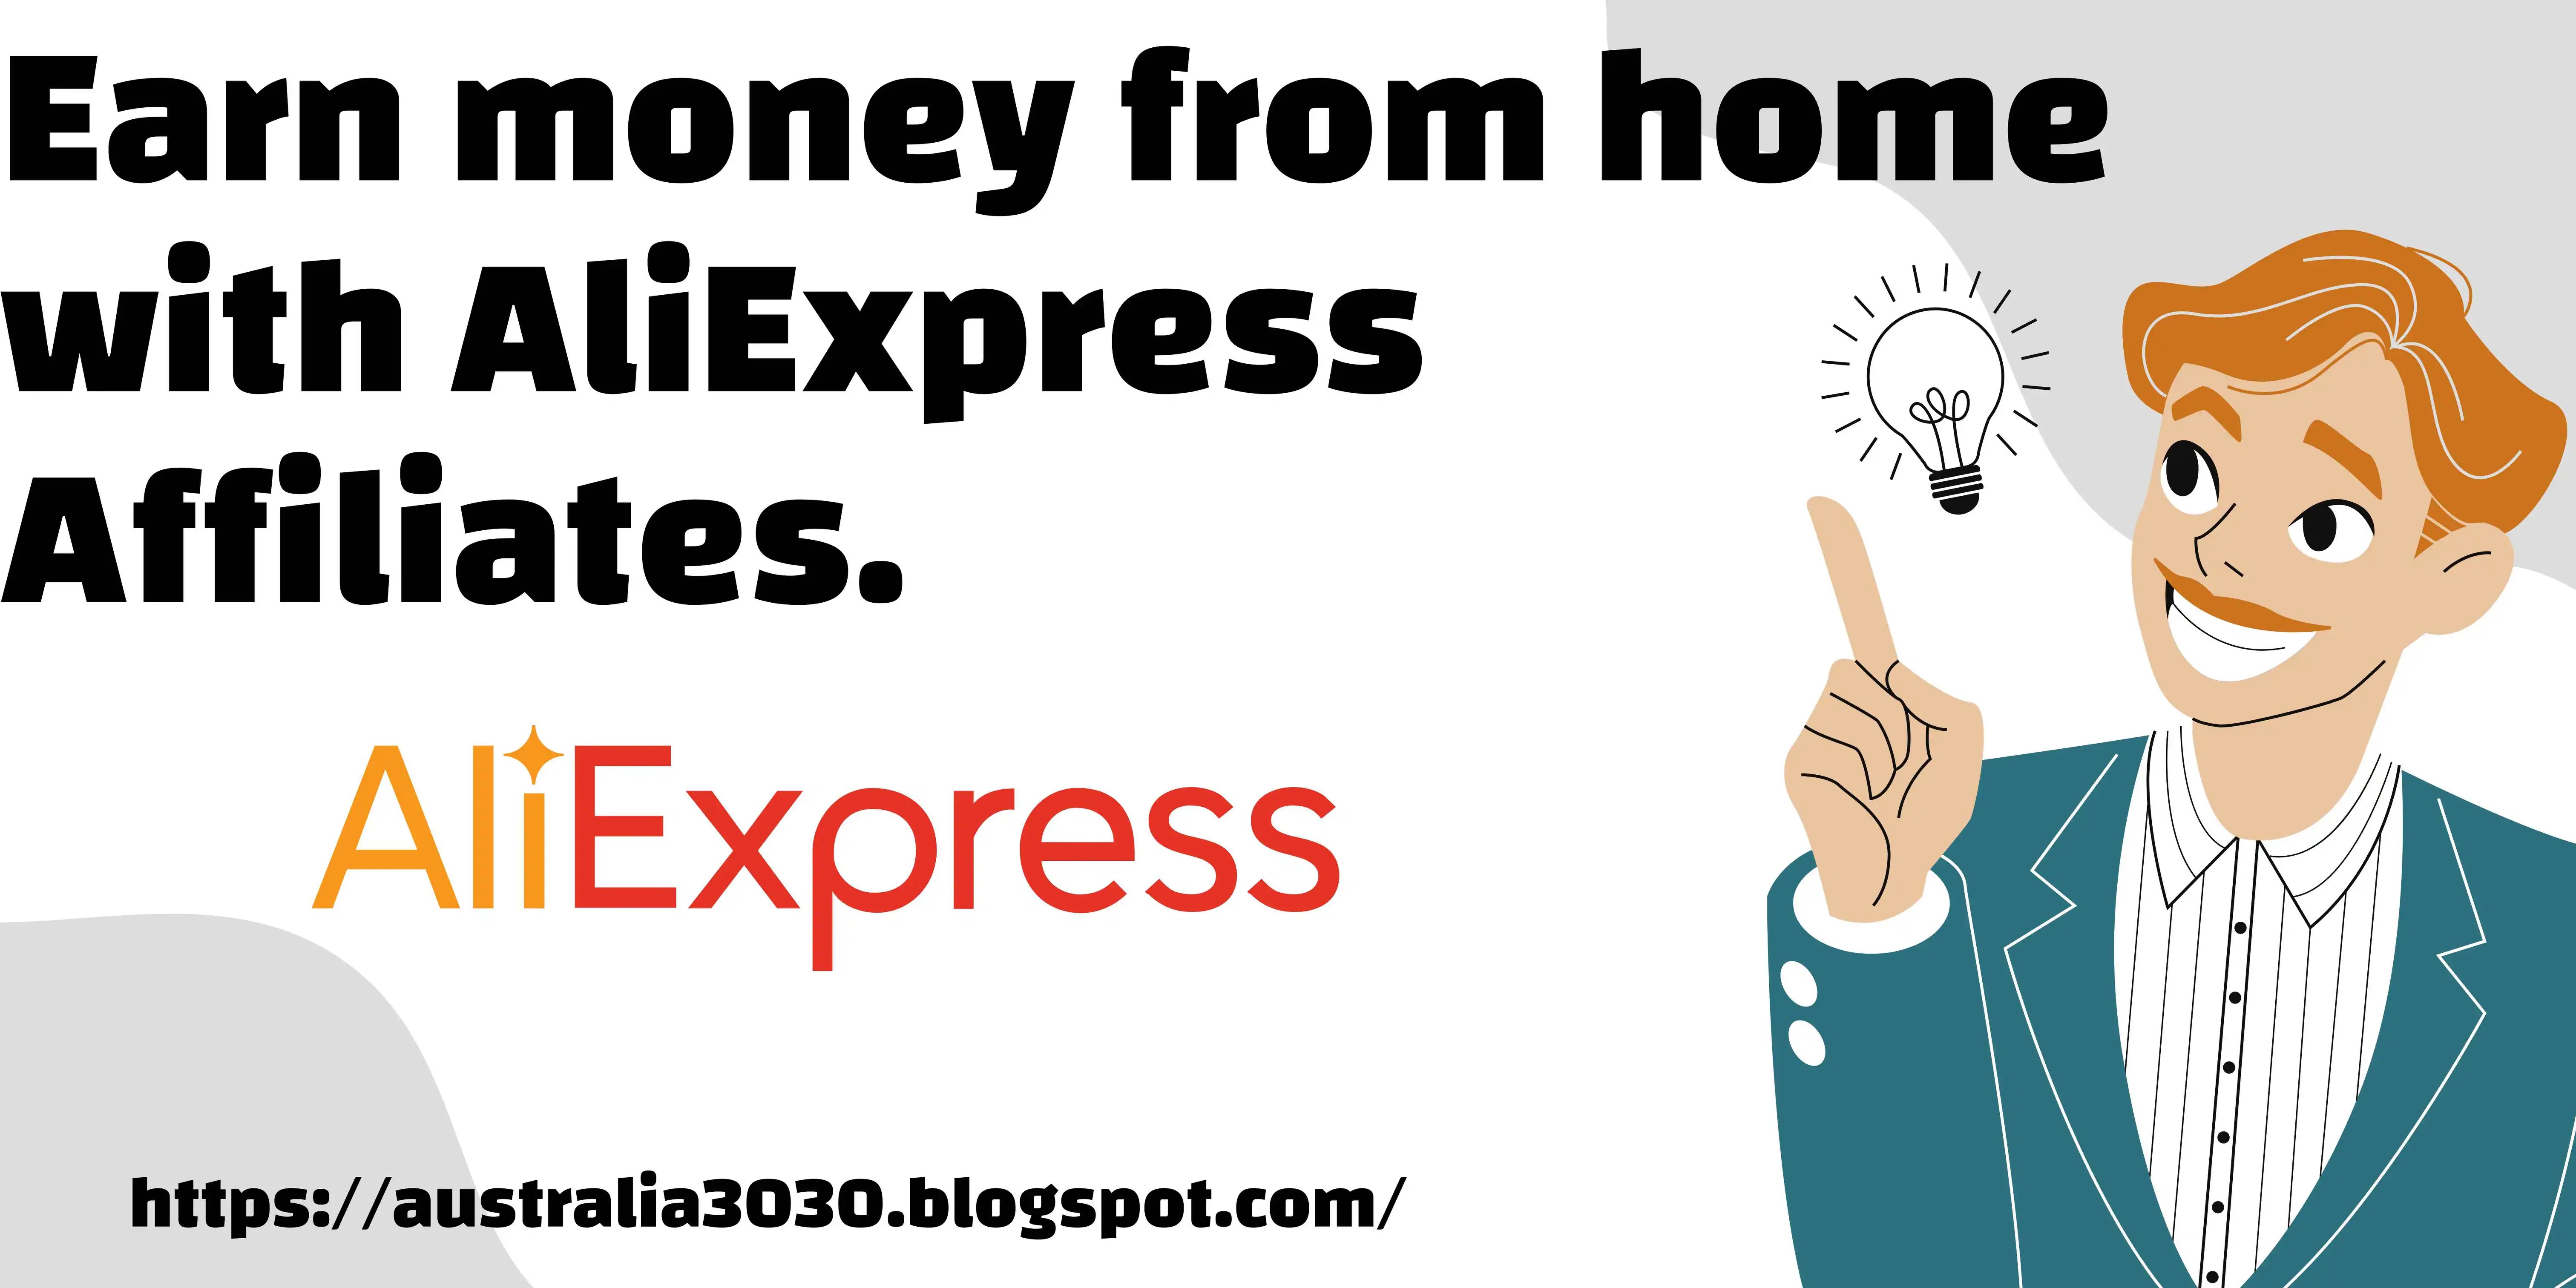 Earn money from home with AliExpress Affiliates.